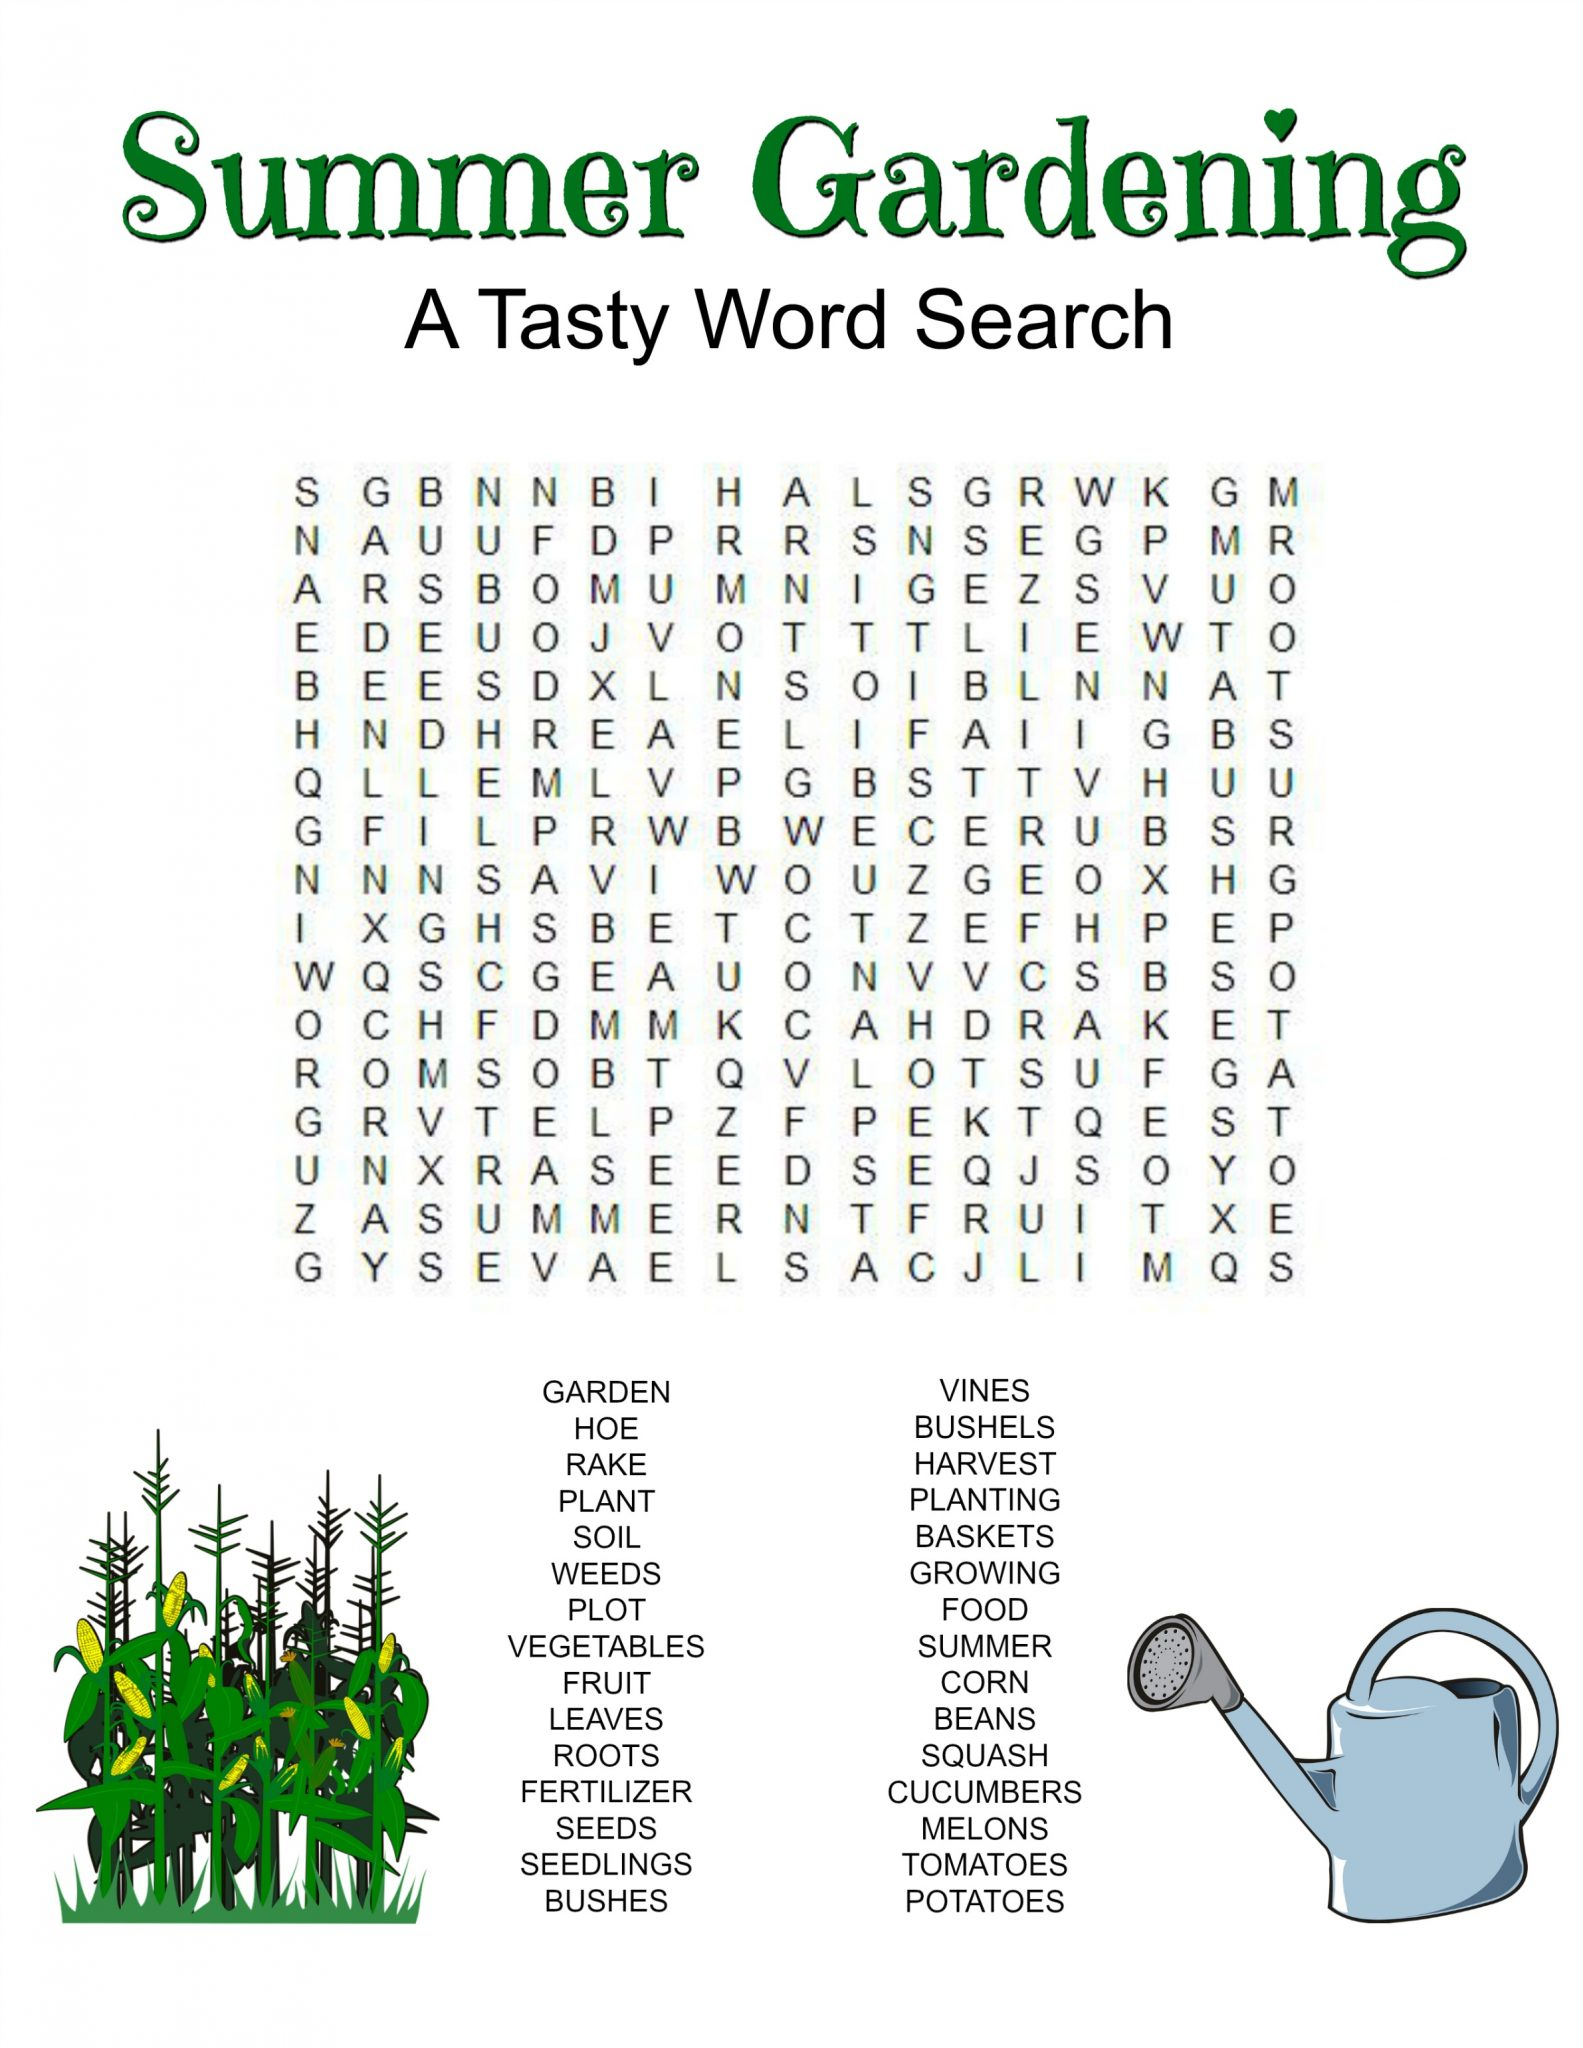 Classification Of Living Things Printable Crossword Puzzle